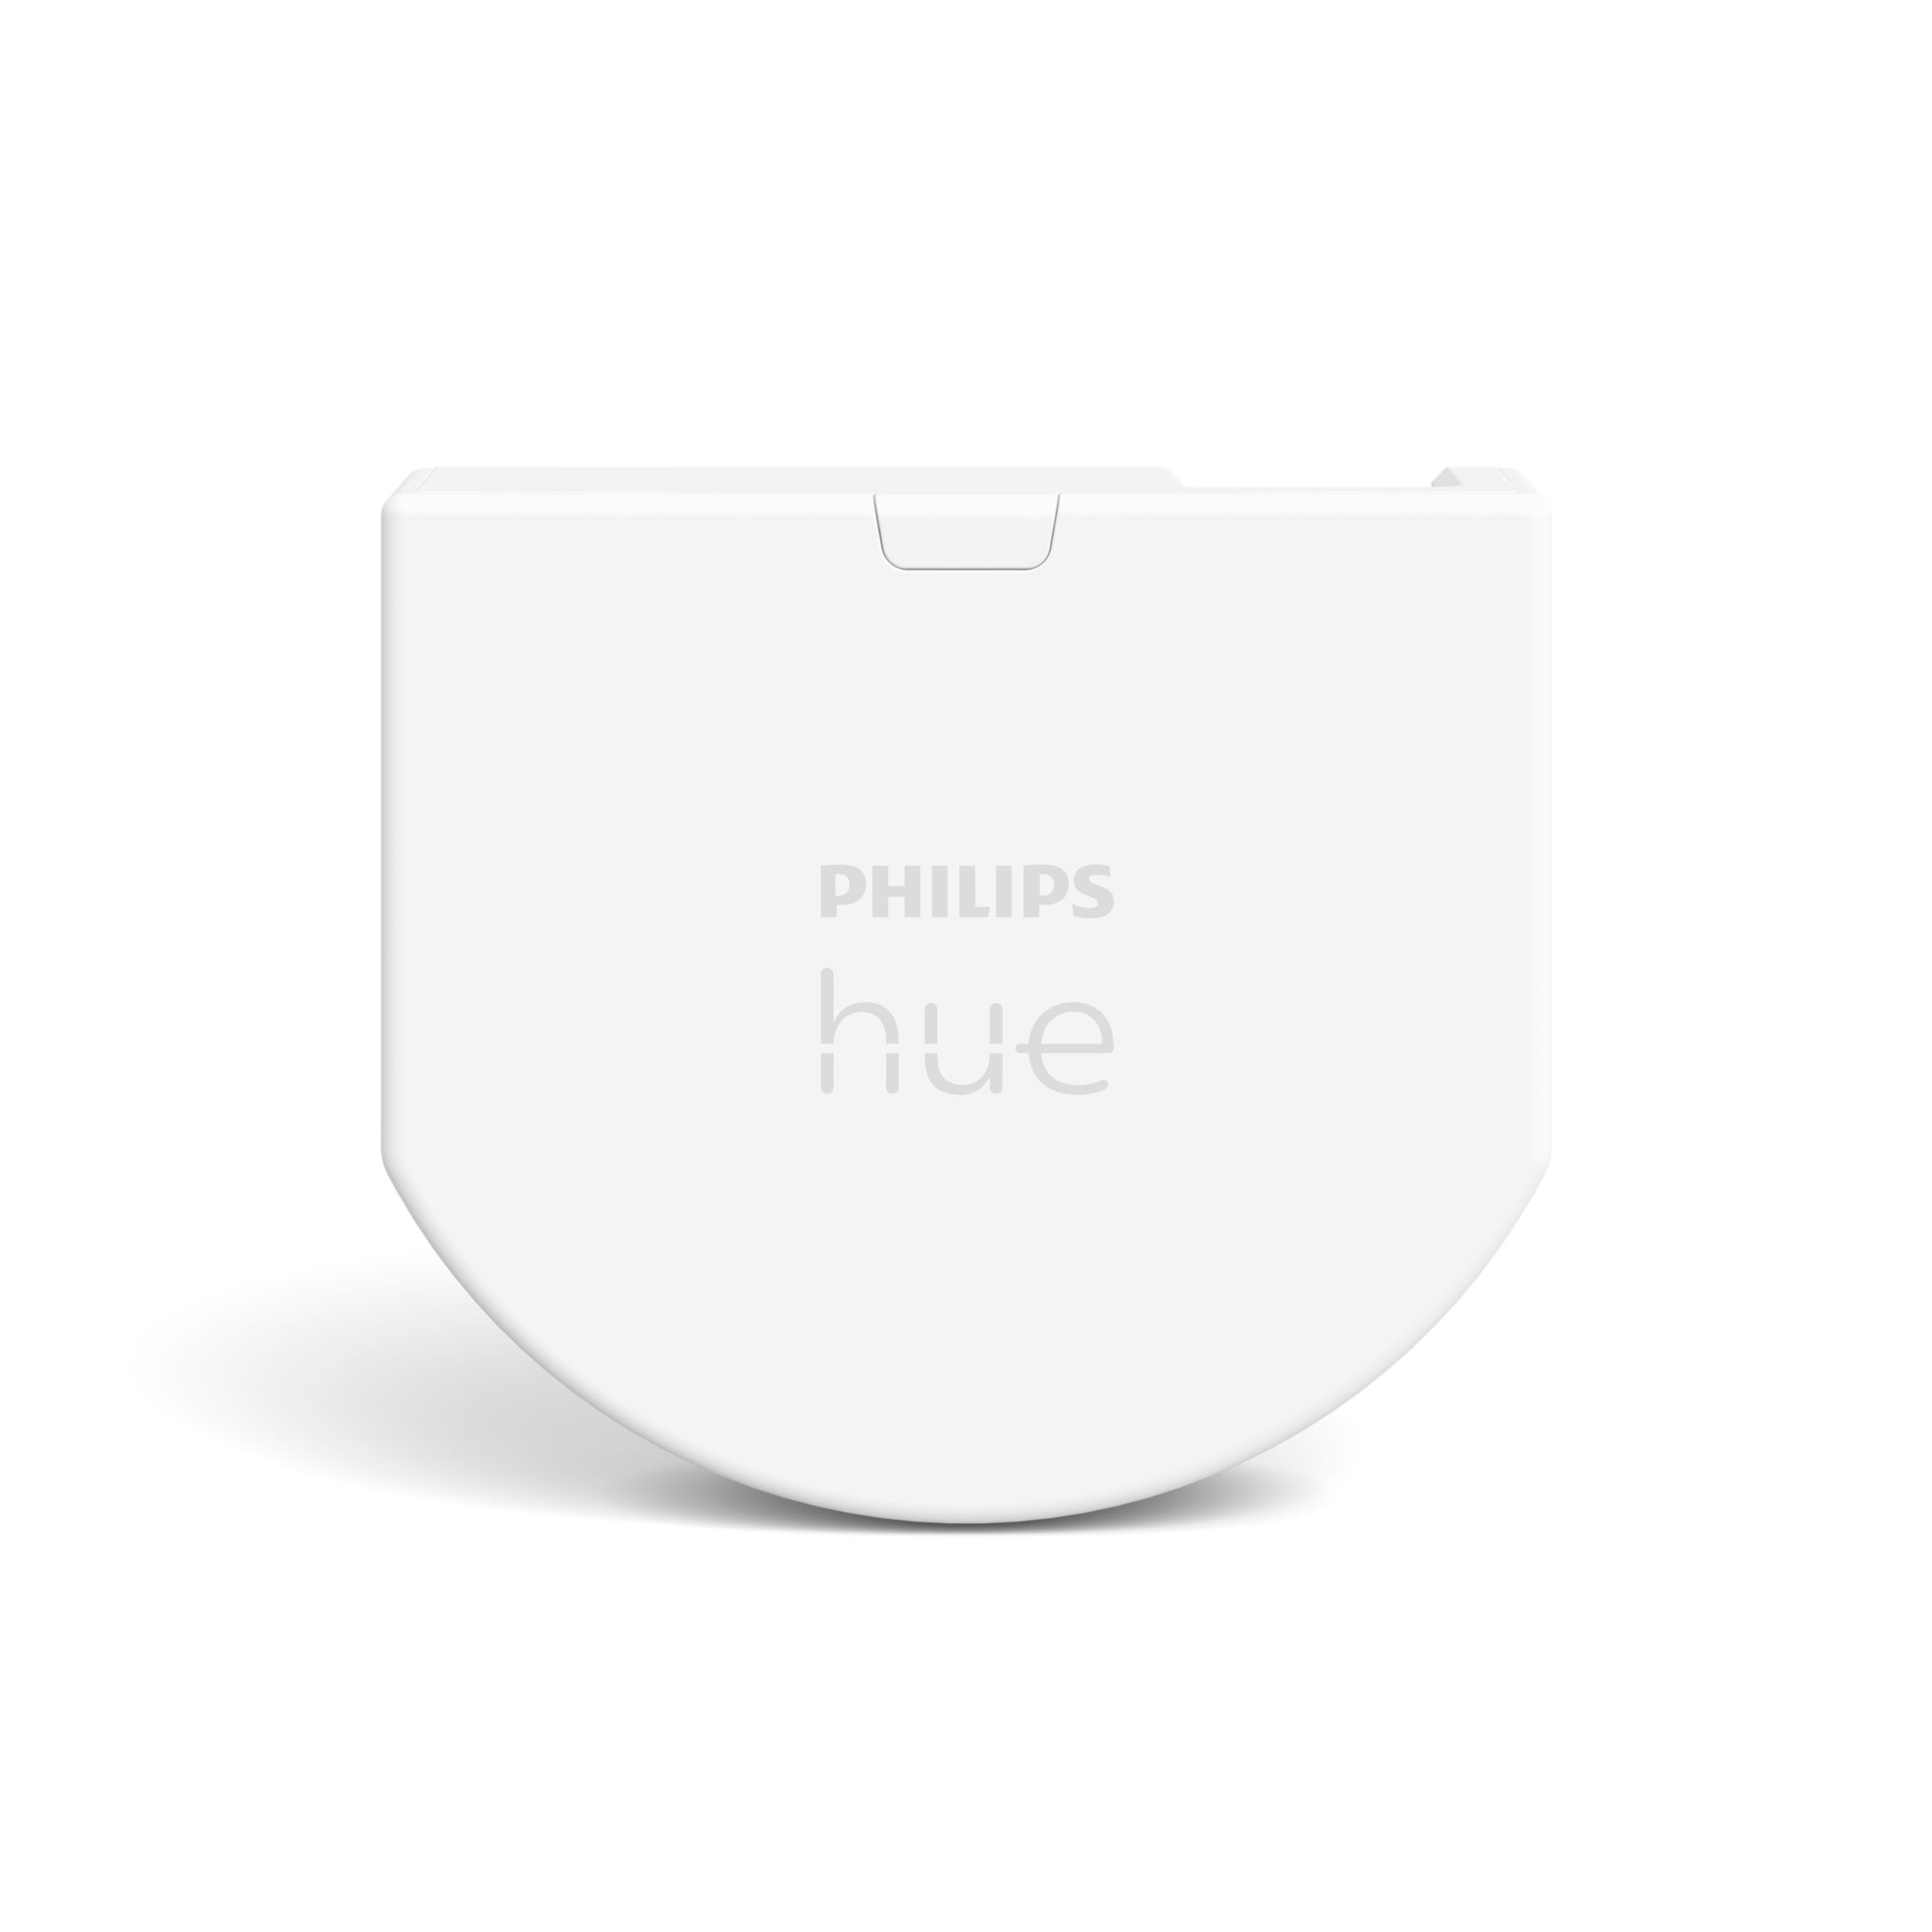 Wall Mount Smart Home Control Holder White for Philips Hue Bridge